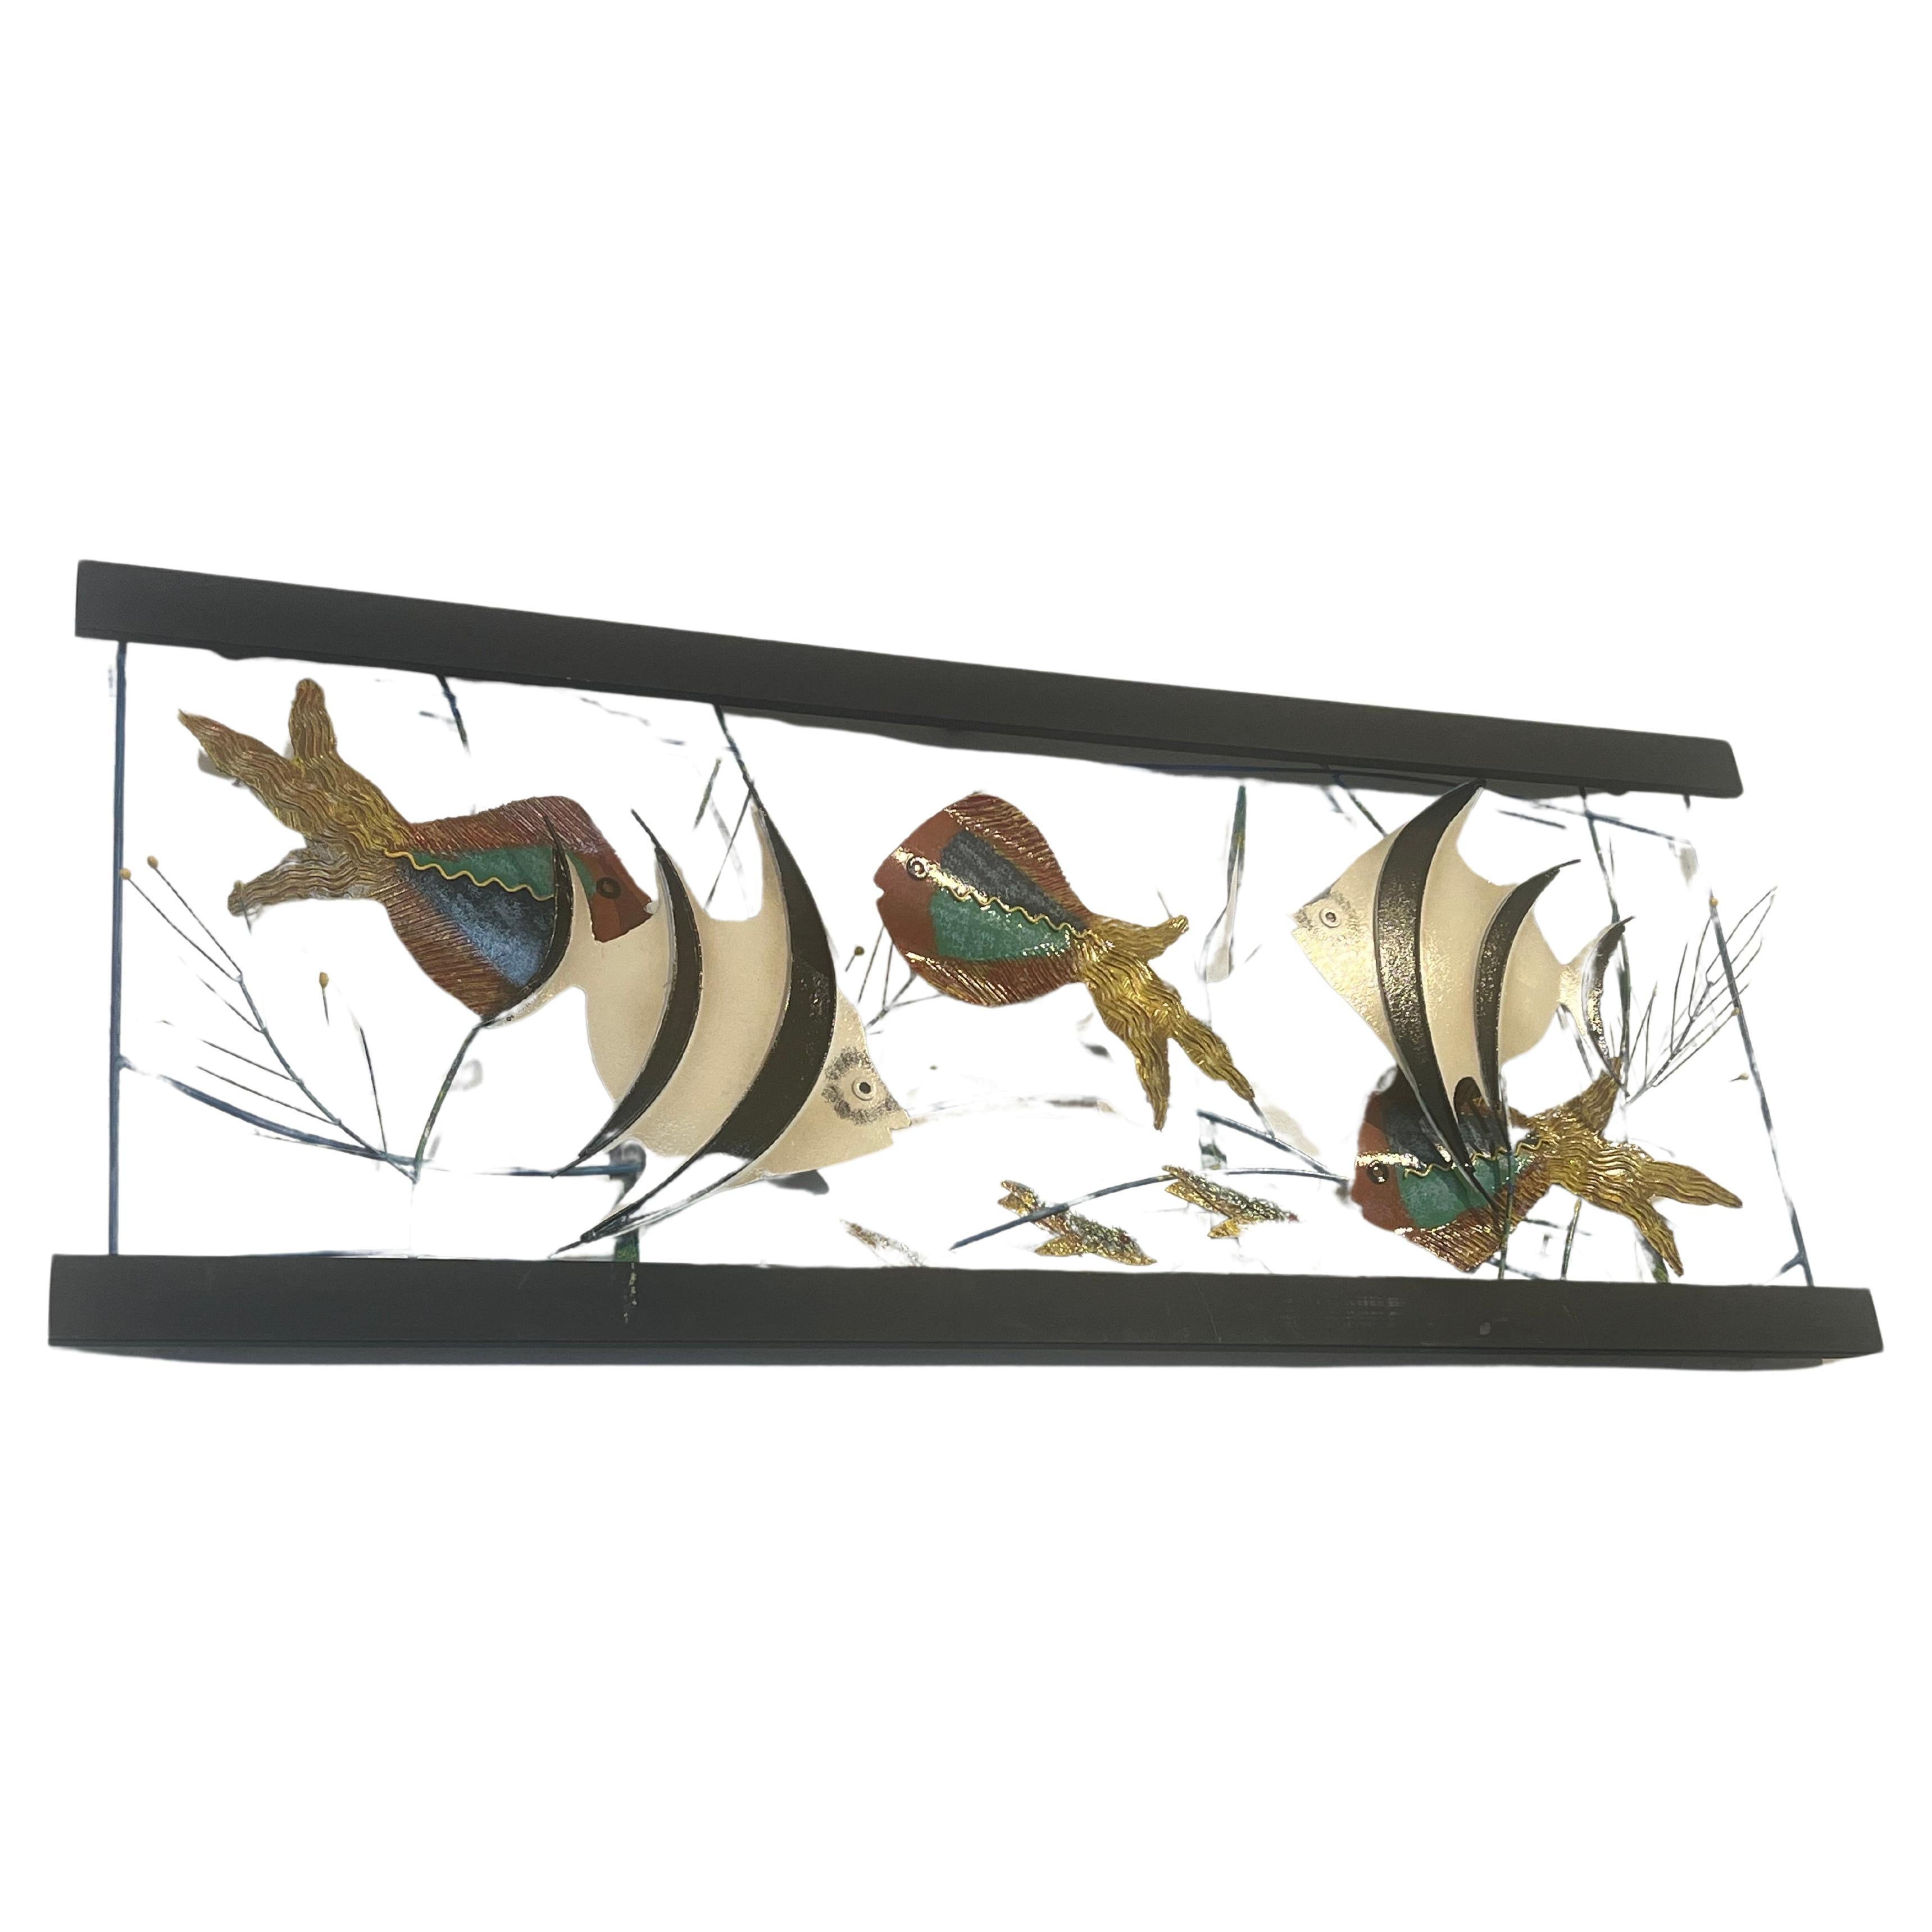 A very cool and rare striking large aquarium by Curtis Jere. unique large wall sculpture.